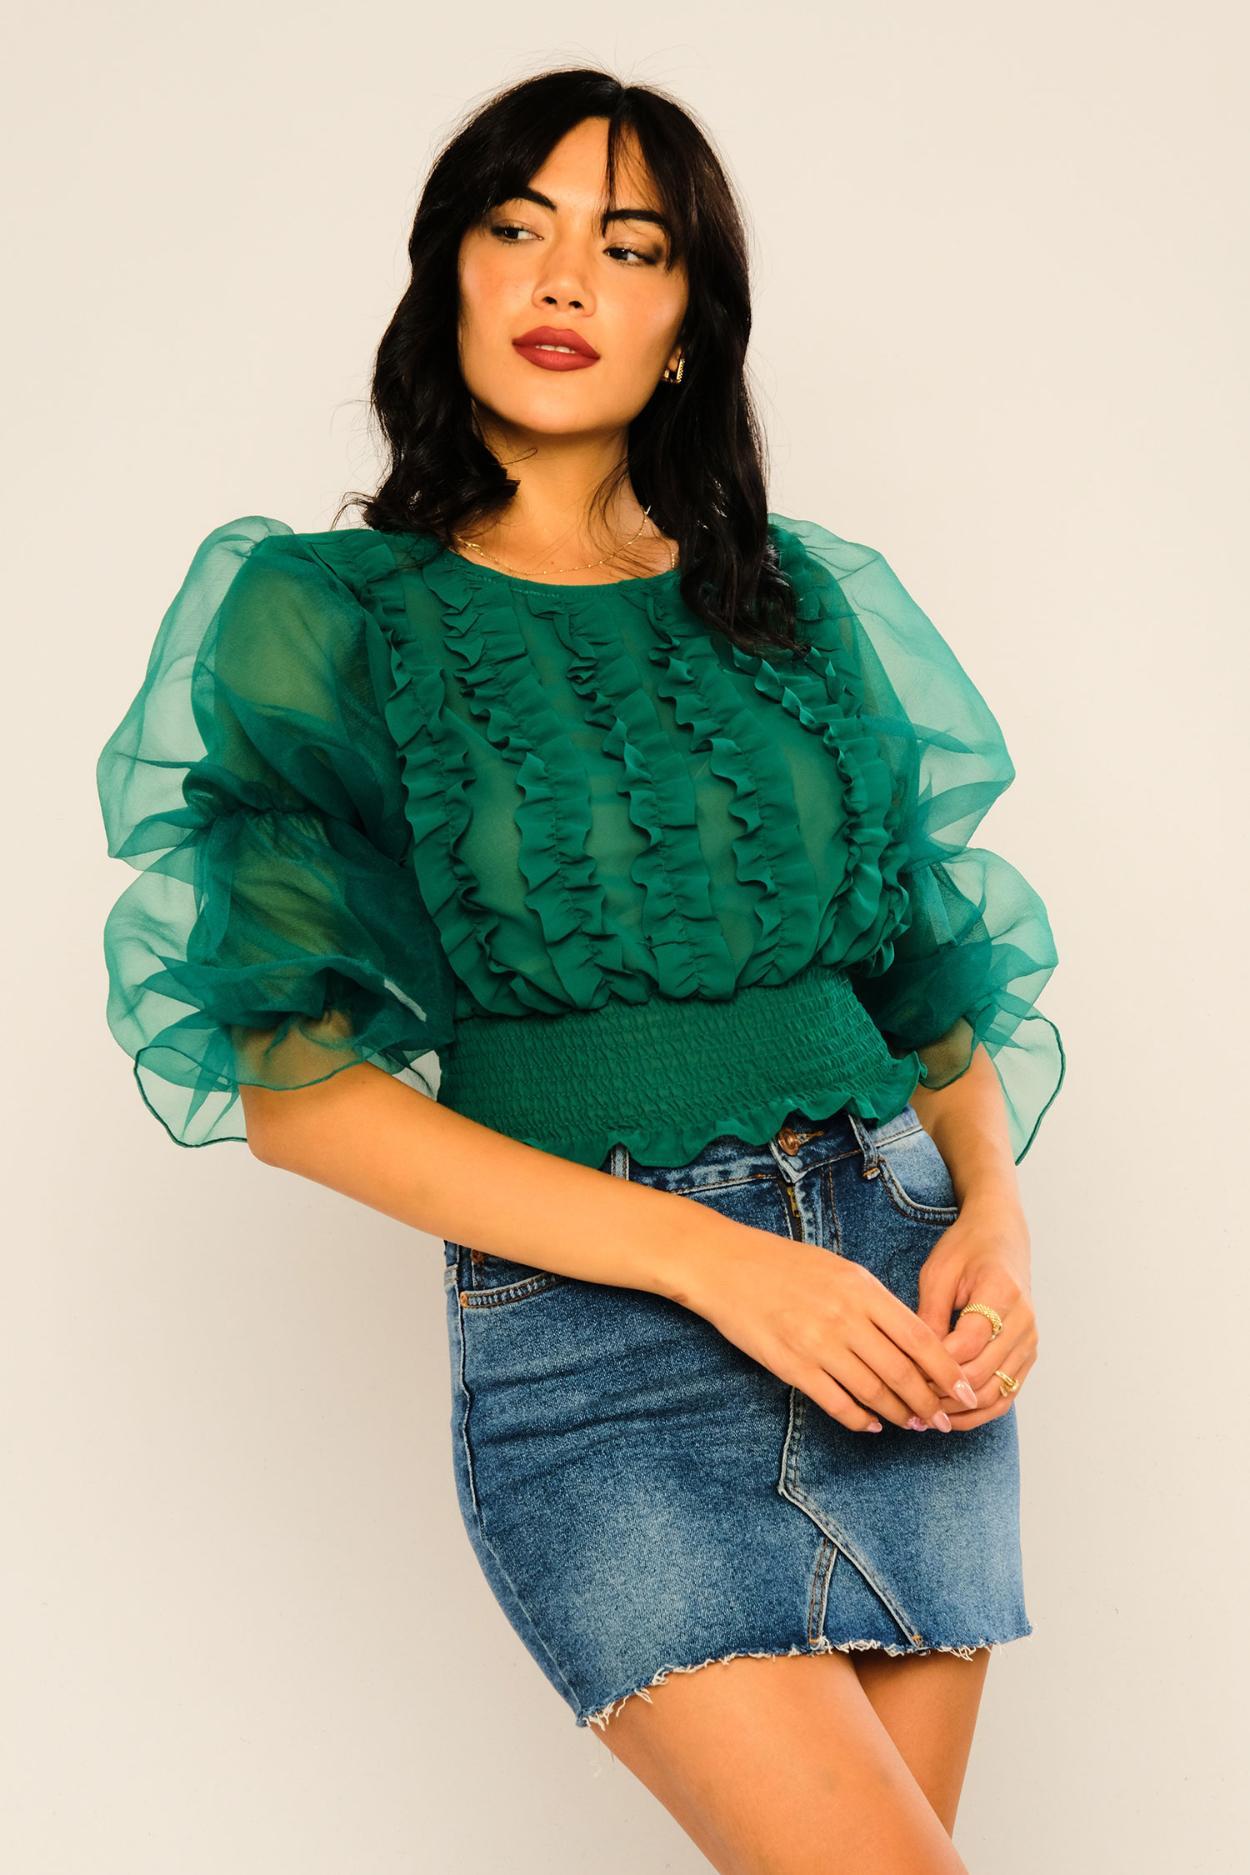 Shop Blouses and Shirts for Women Online